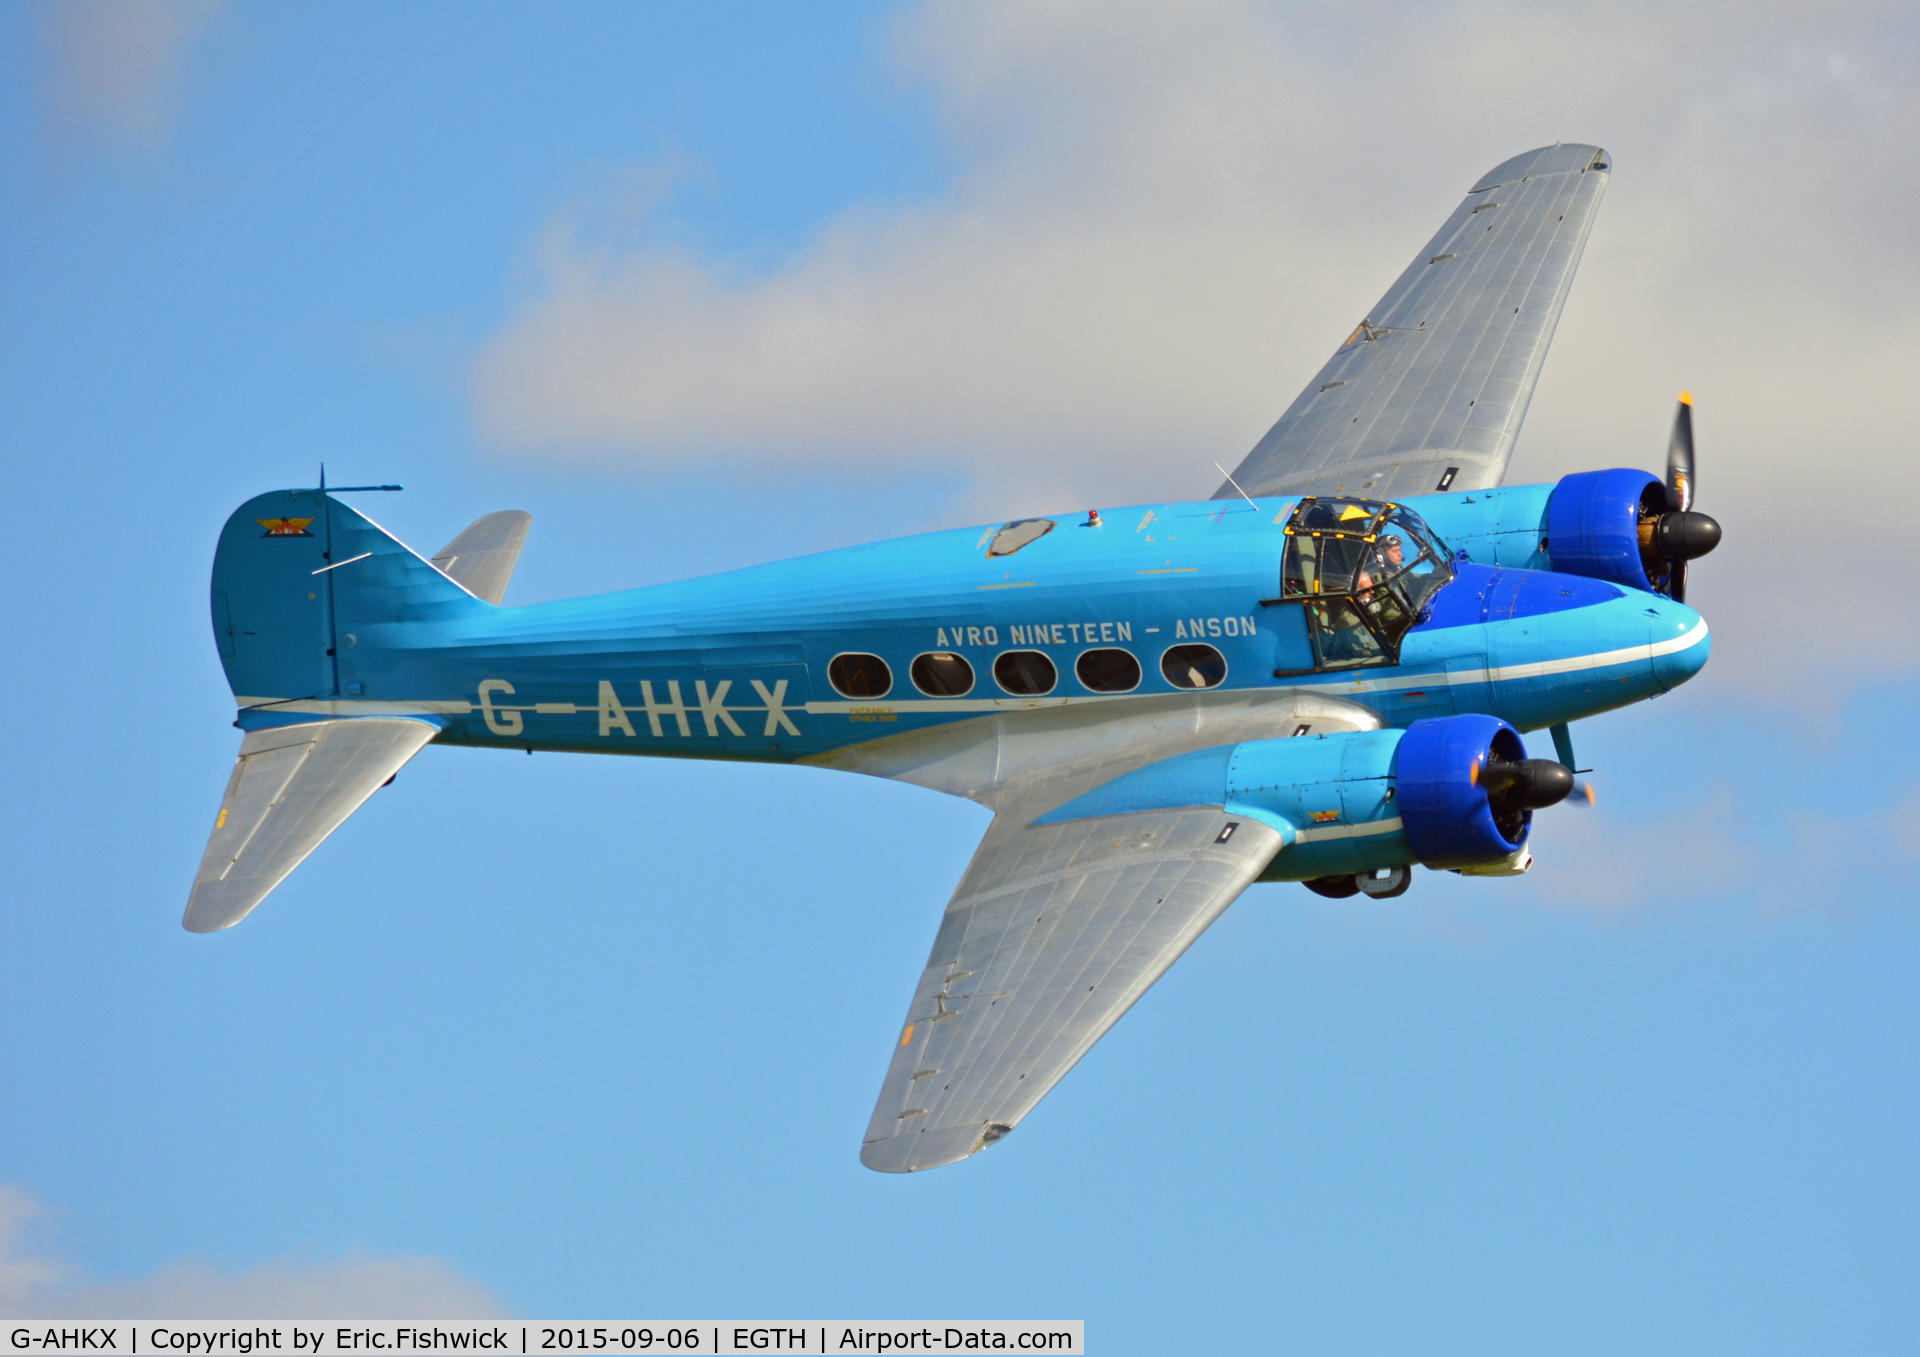 G-AHKX, 1946 Avro 652A Anson C.19 Series 2 C/N 1333, 42. G-AHKX in display mode at The Shuttleworth Pagent Airshow, Sep. 2015.